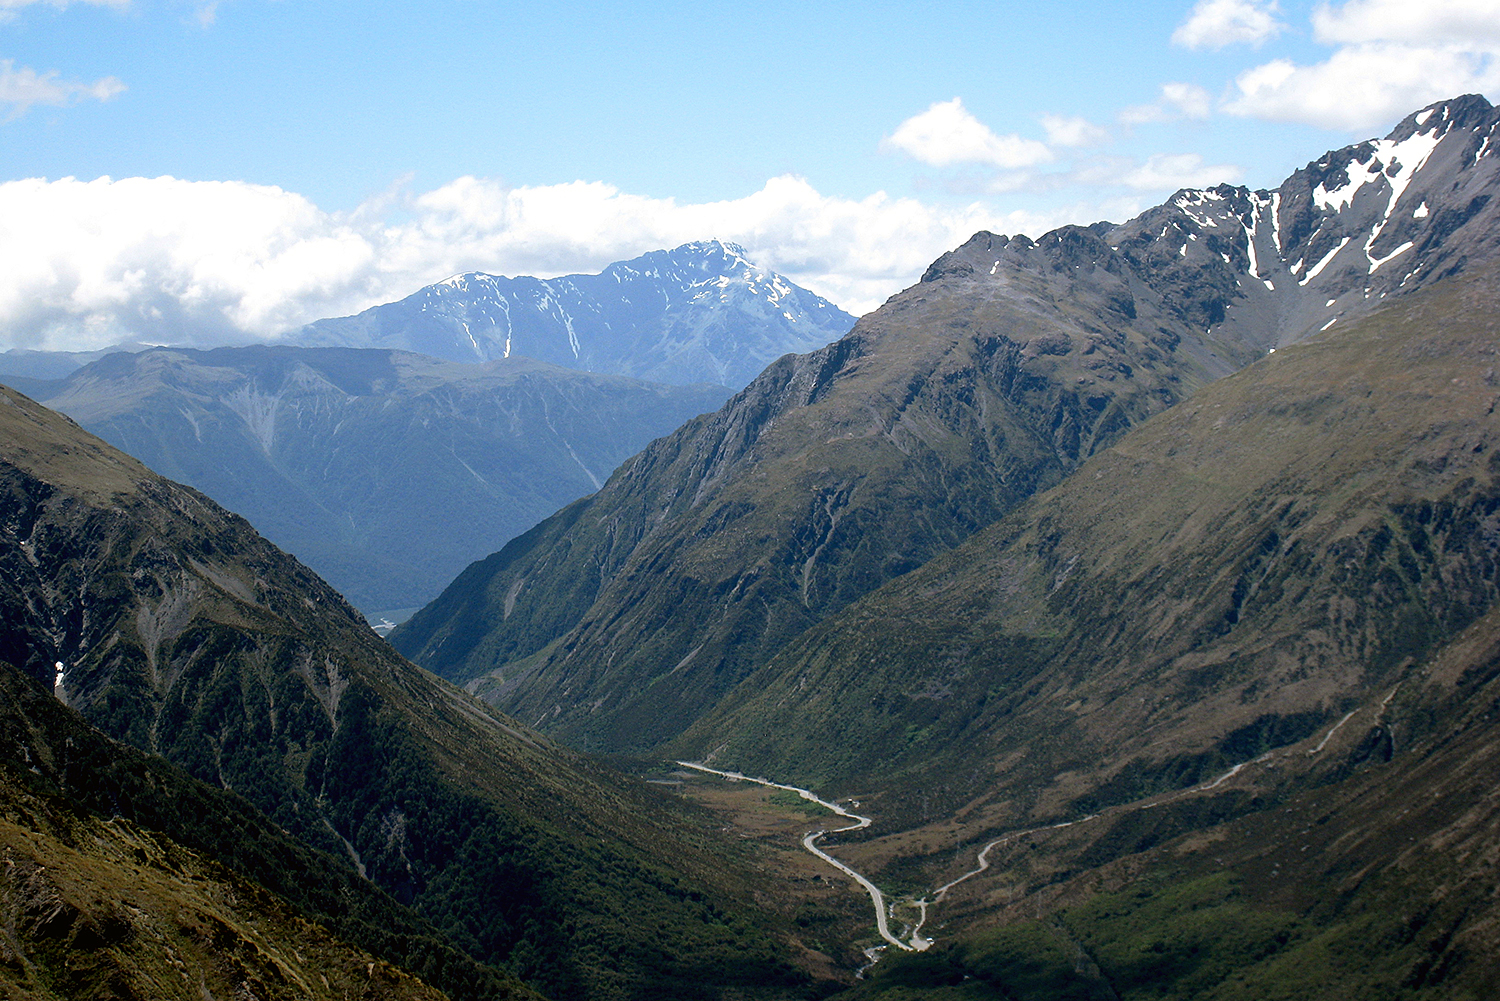 Avalanche Peak is as hair-raising as it sounds. Only experienced hikers should pace to this 1100m summit in New Zealand's Arthur's Pass National Park. Image by Rick Cox / CC BY-SA 2.0